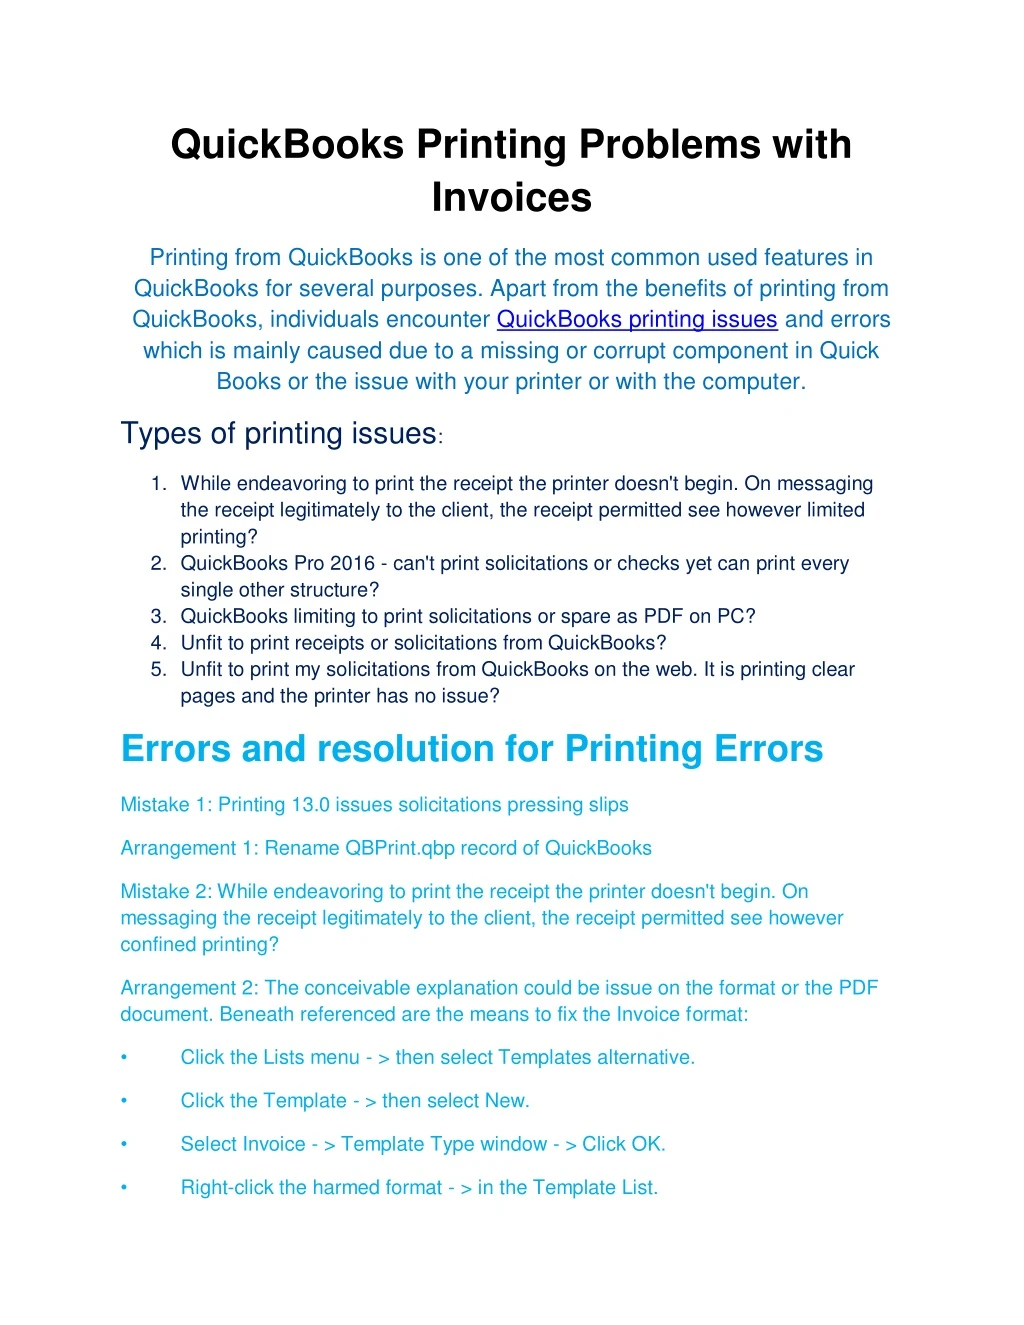 quickbooks printing problems with invoices